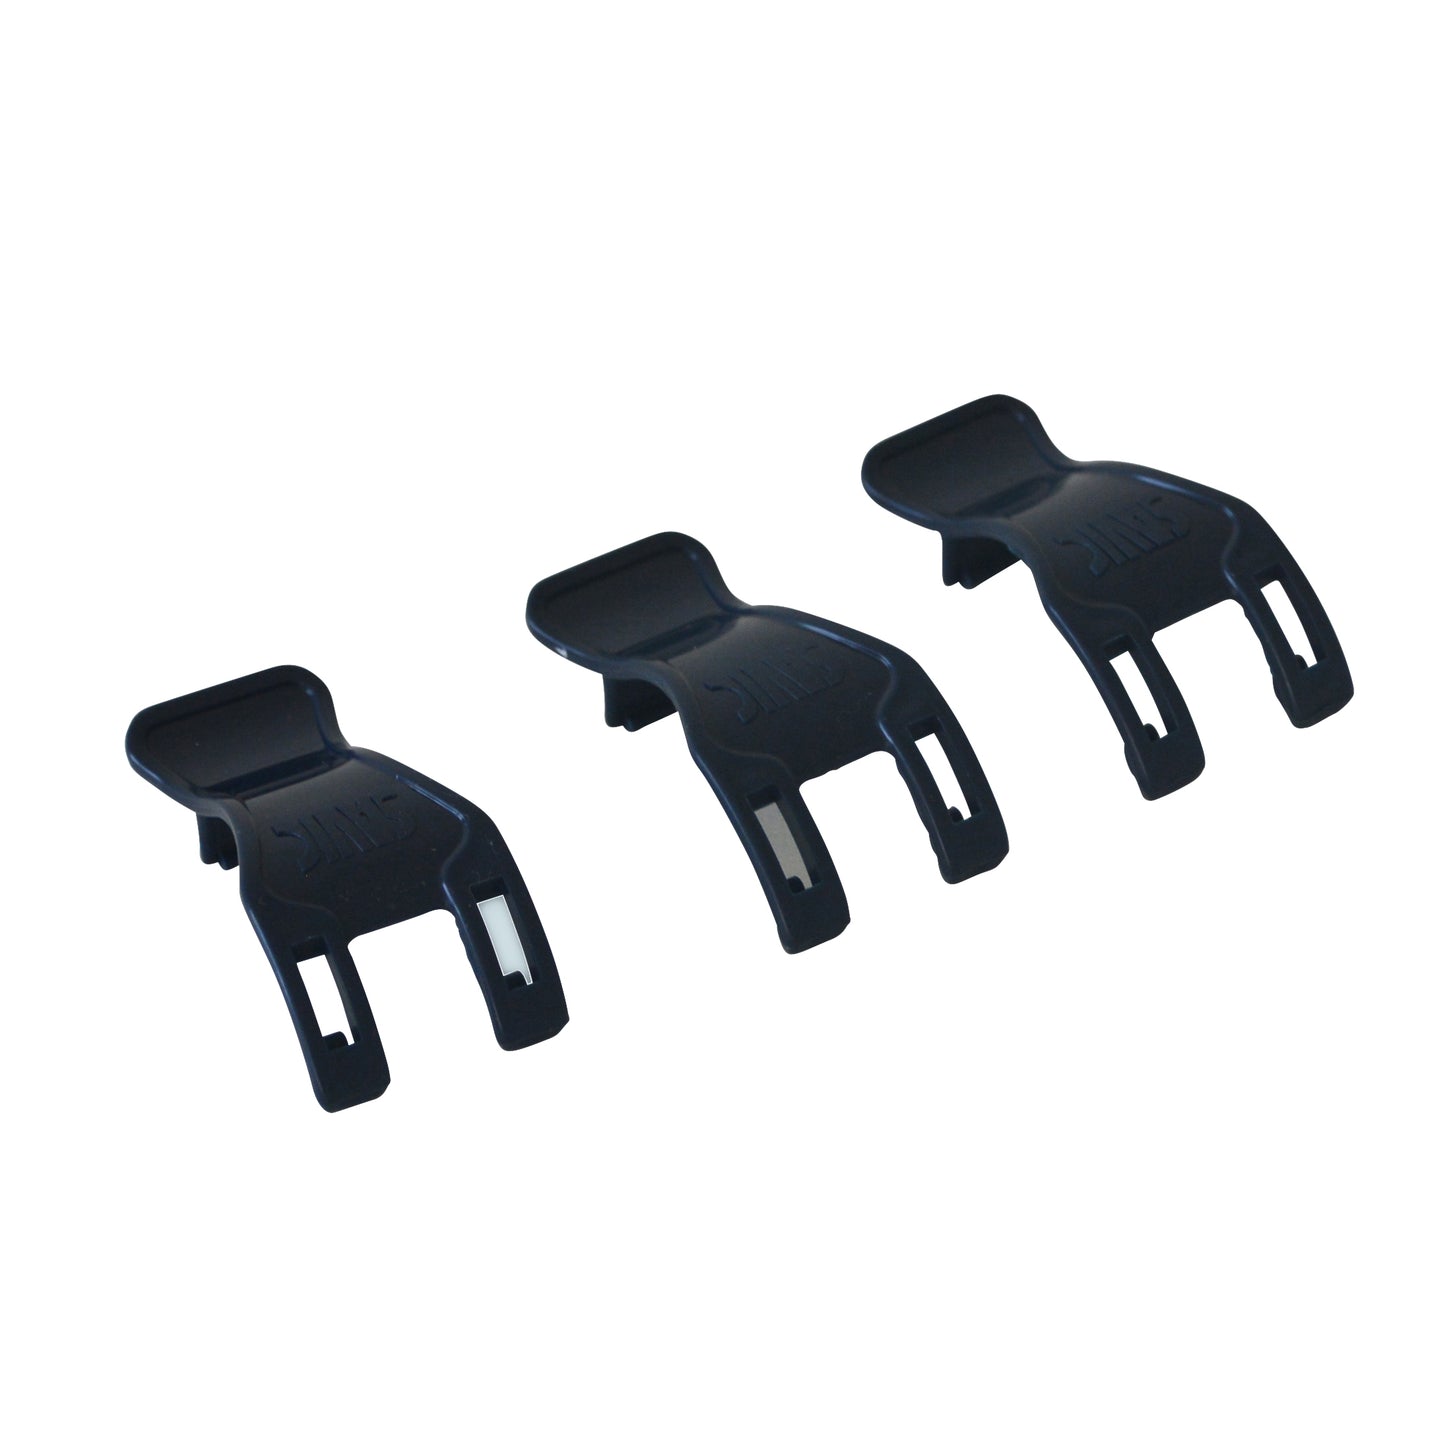 Set of 3 clips small black (Ambiente)